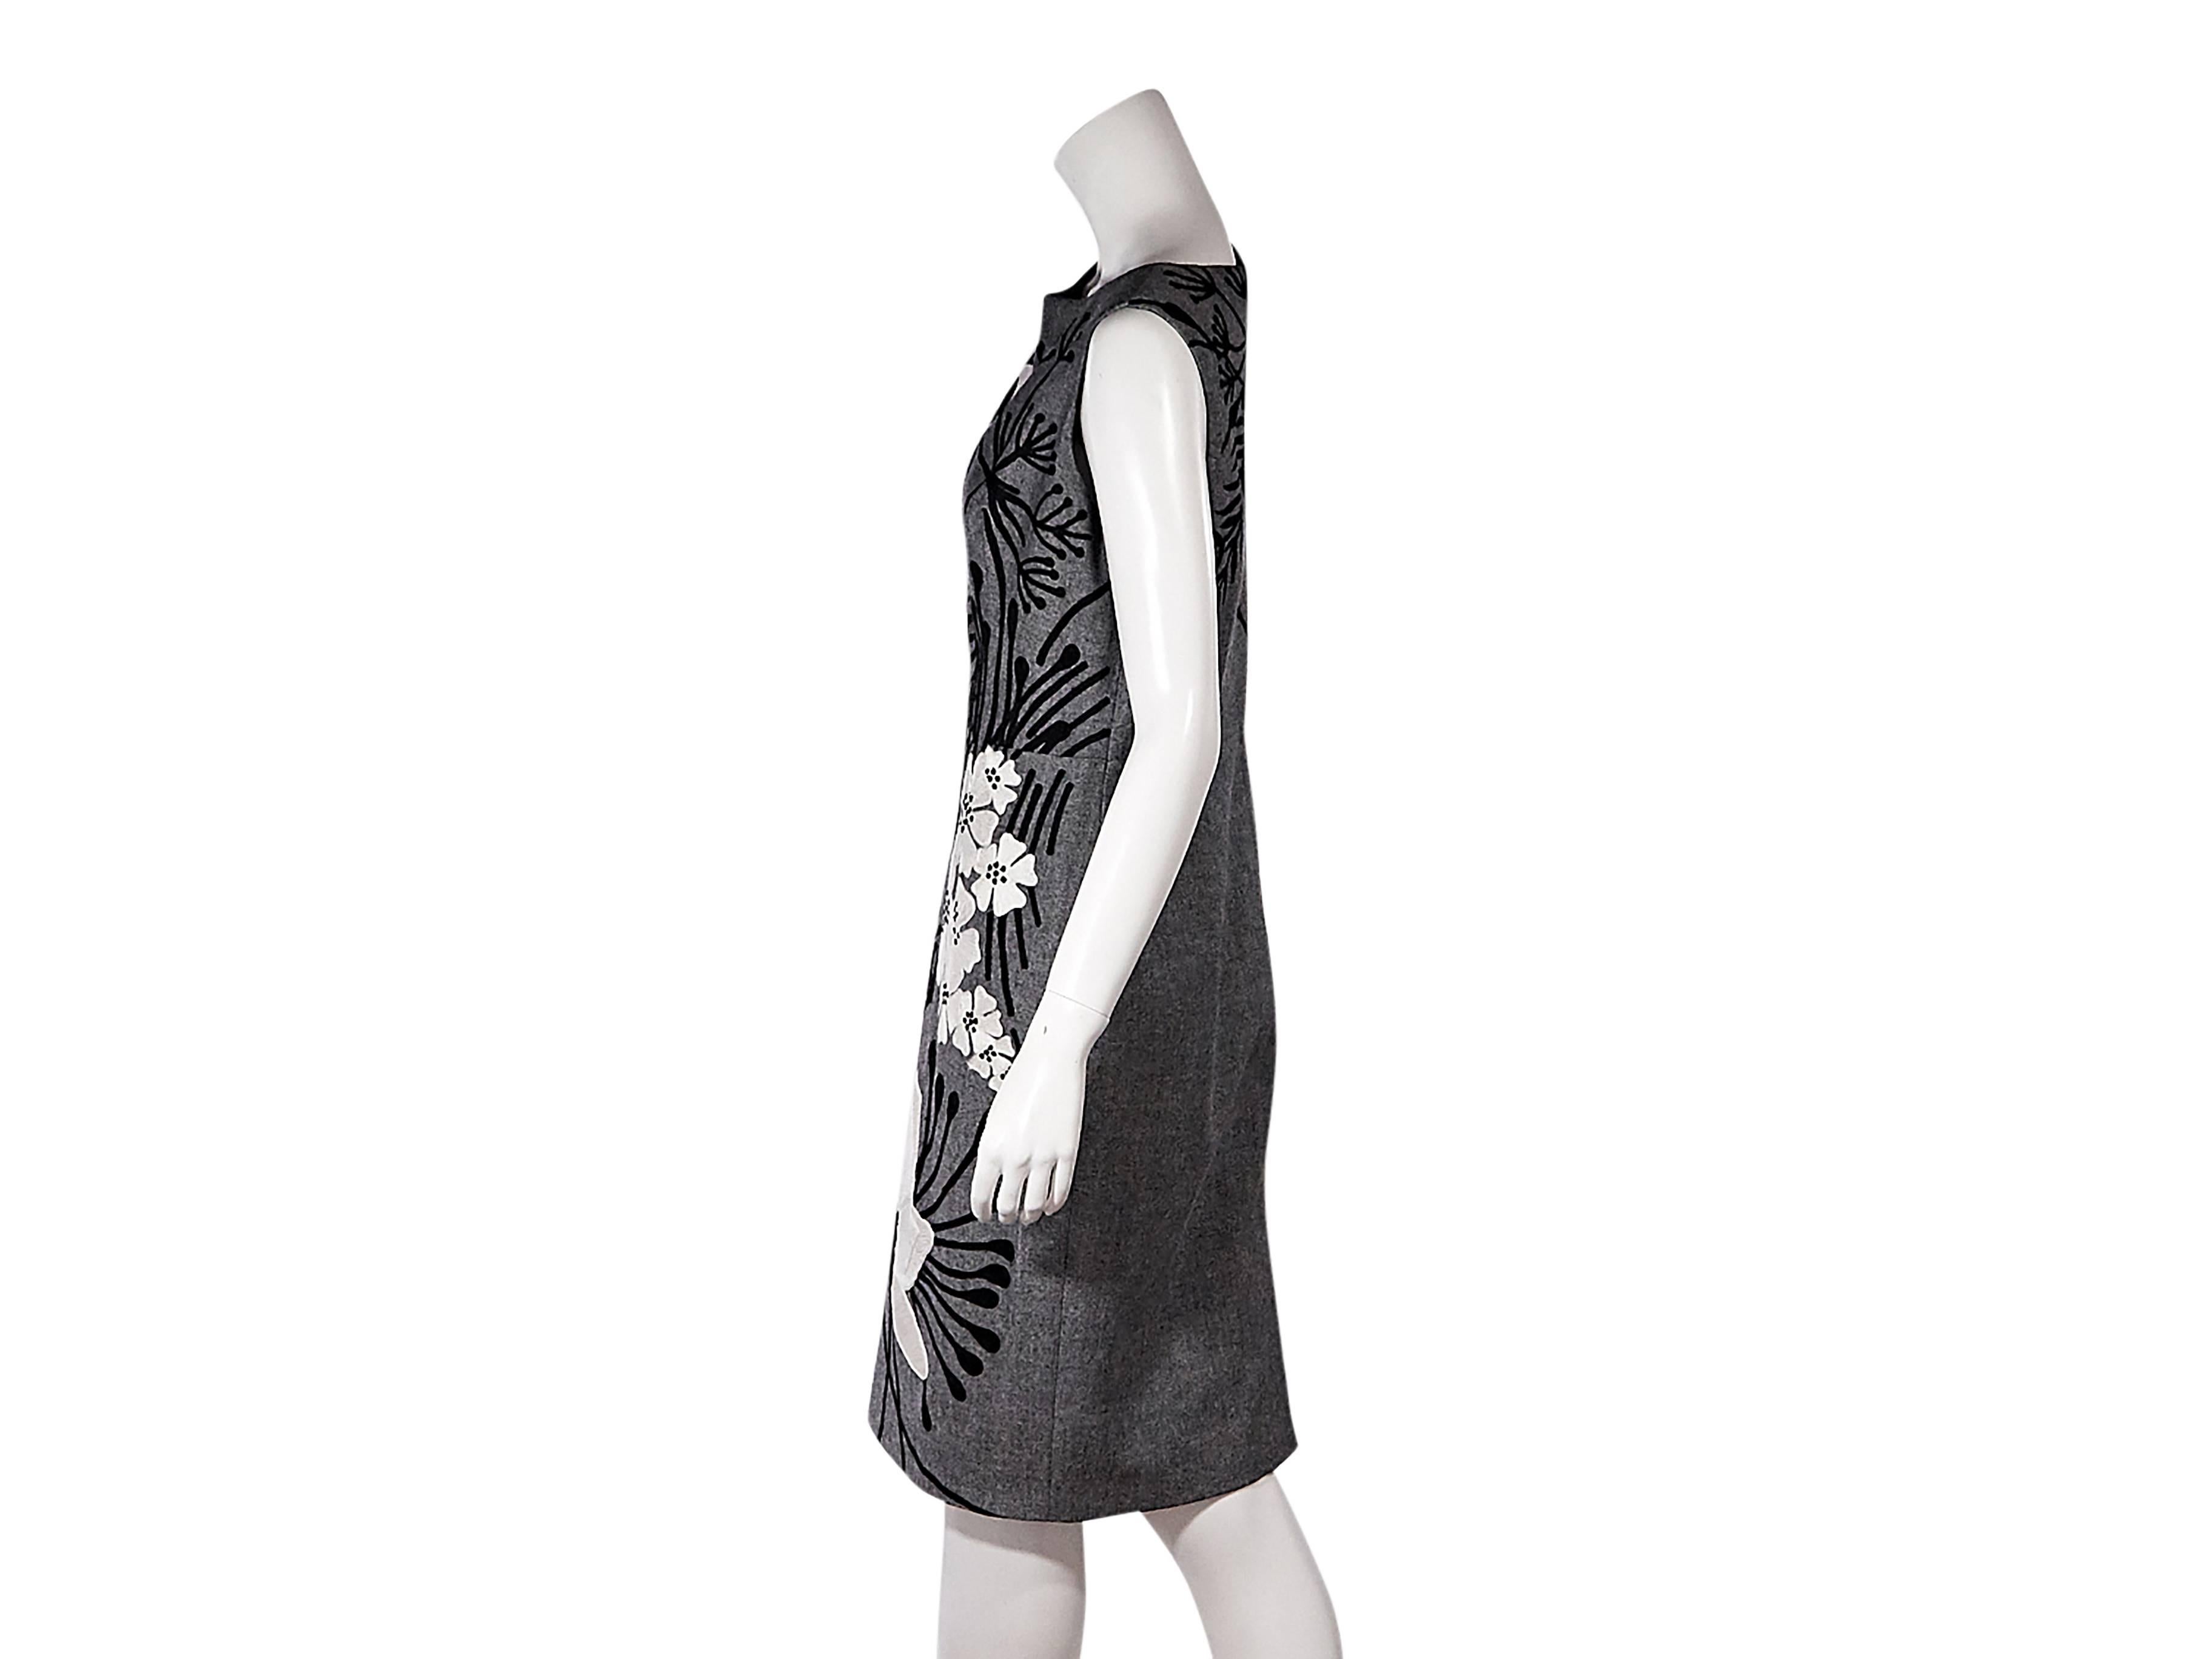 Product details:  Grey sheath dress by Carolina Herrera.  Features black and white floral embroidery.  Boatneck.  Sleeveless.  Concealed back zip closure.  Back center hem vent.  Size 12
Condition: Pre-owned. Very good.

Est. Retail $ 1,198.00